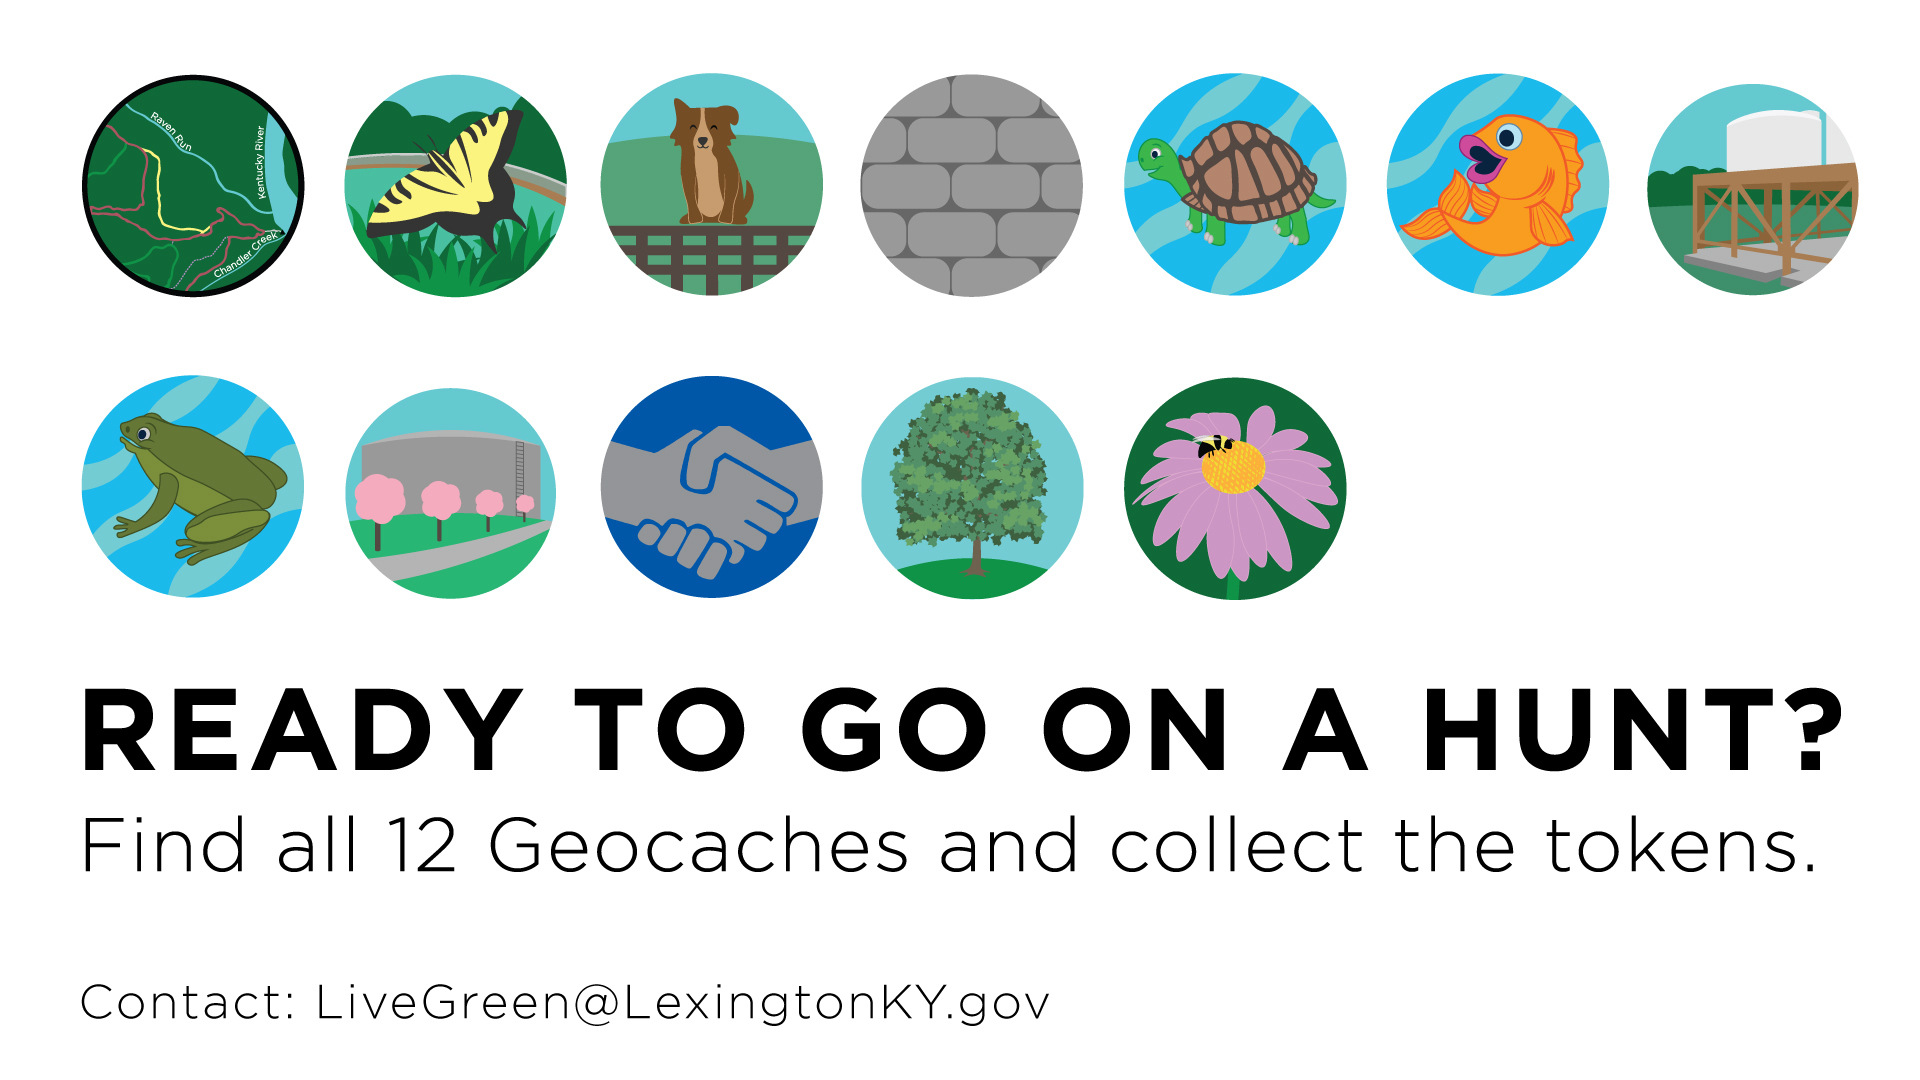 12 Small pictures Representing prize buttons. Text that reads: Ready to go on a hunt? Find all 12 geocaches and collect the tokens. Contact: LiveGreen@LexingtonKY.gov